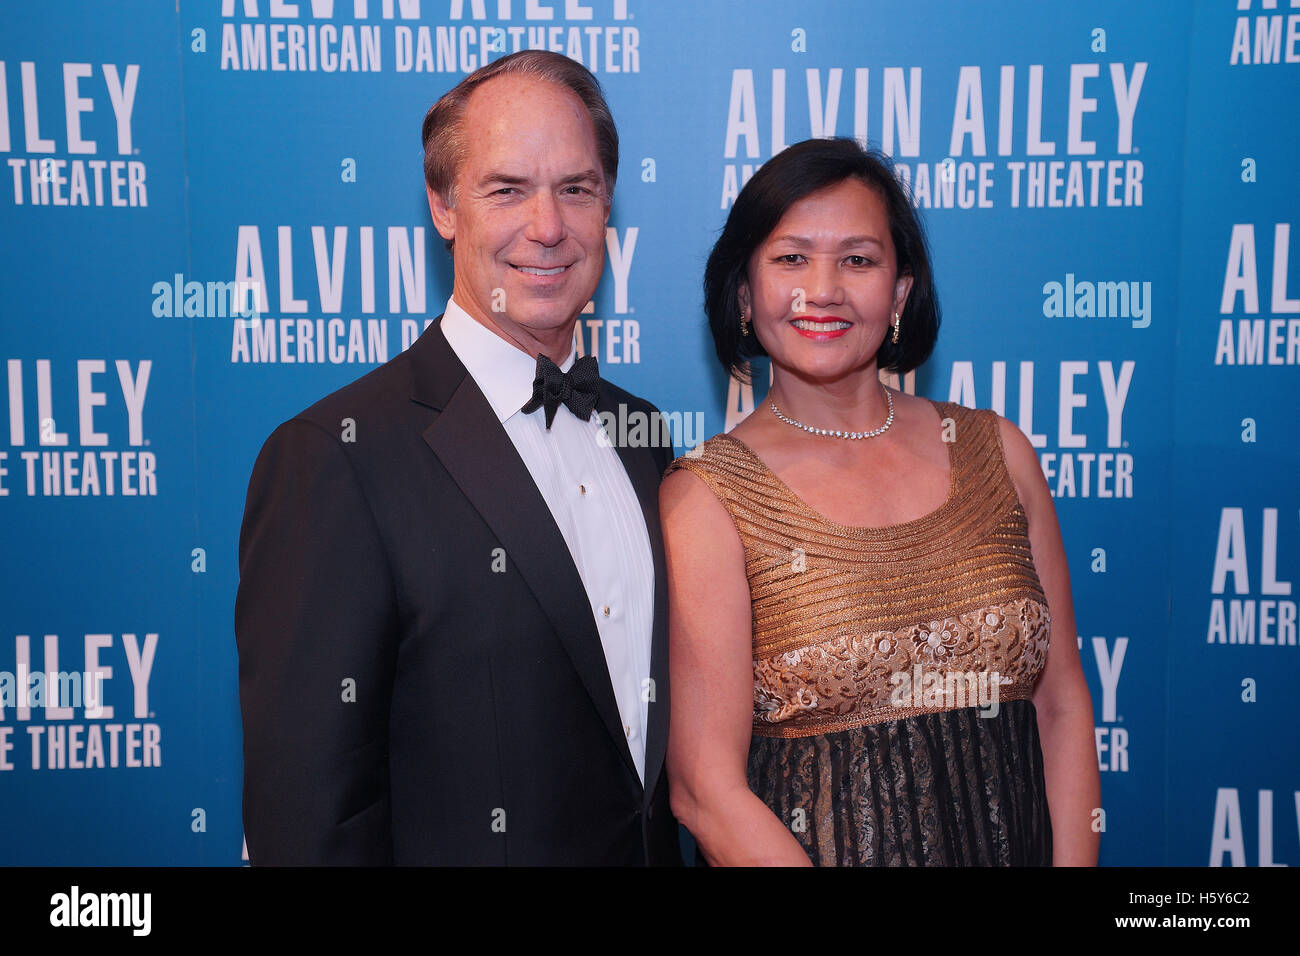 Gerald & Agnes Hassell attend the Red Carpet at the Opening Night Gala Benefit for the 2015/2016 Alvin Ailey American Dance Theater season on December 2, 2015 in New York City. Stock Photo